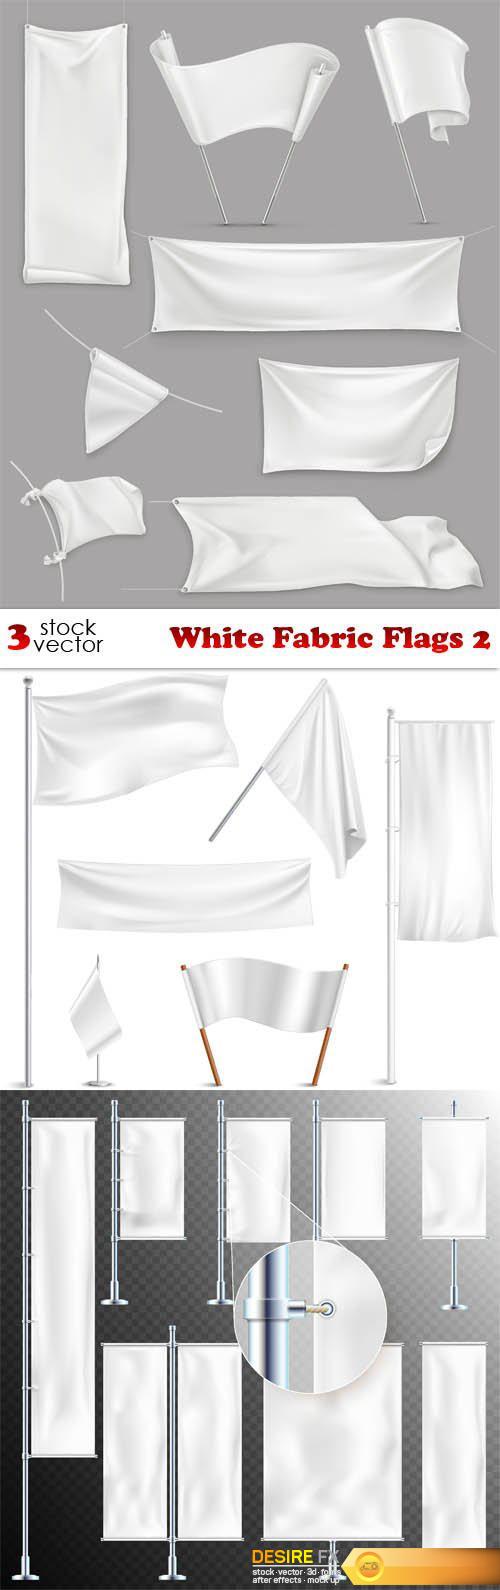 Vectors - White Fabric Flags 2